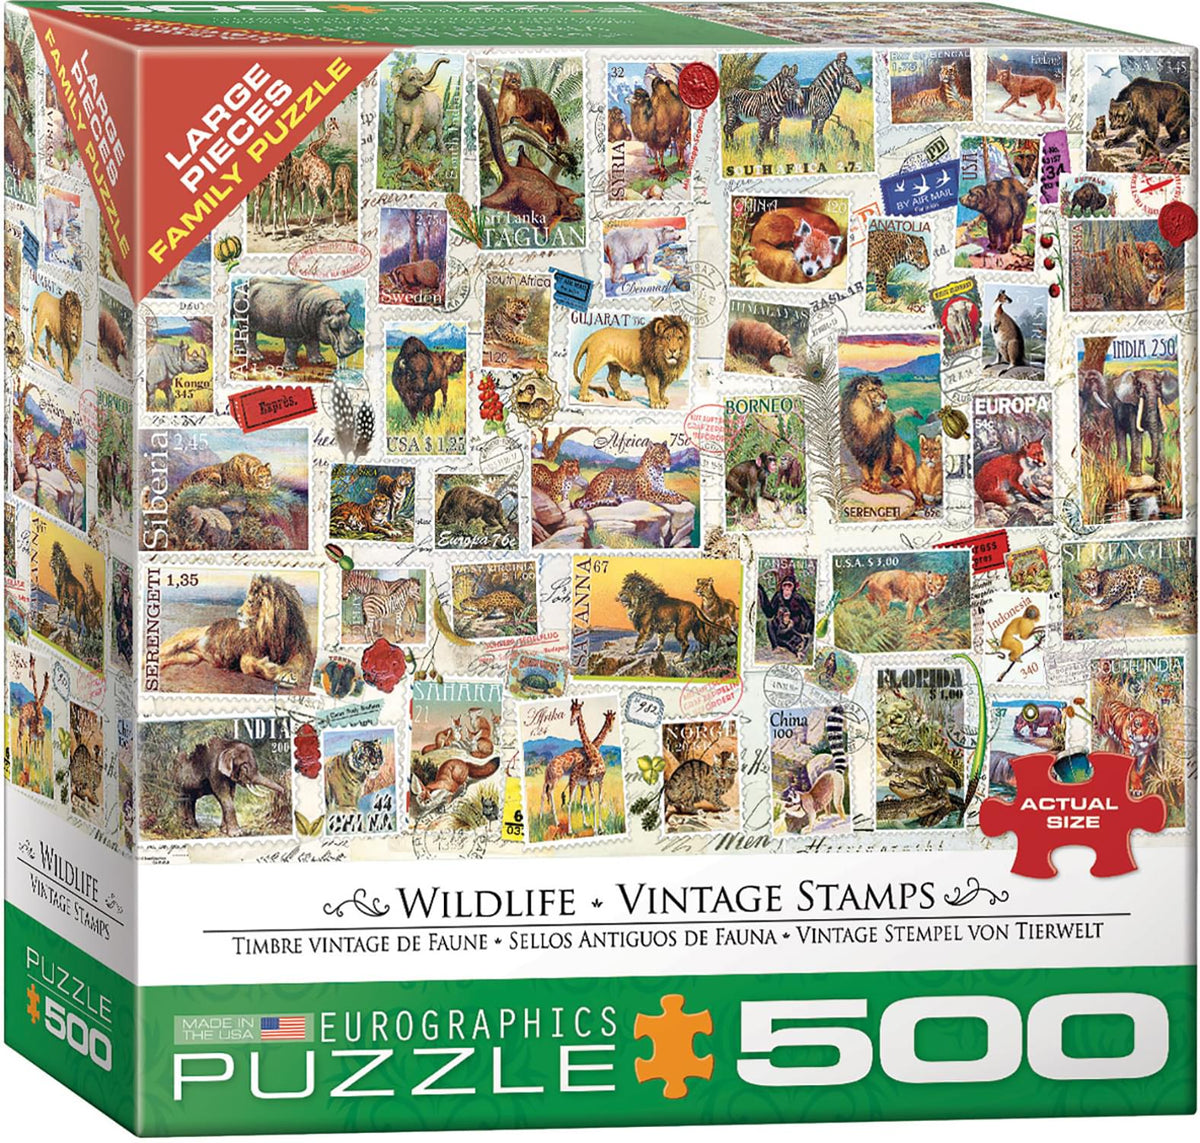 Wildlife Vintage Stamps 500 Piece Jigsaw Puzzle | Free Shipping